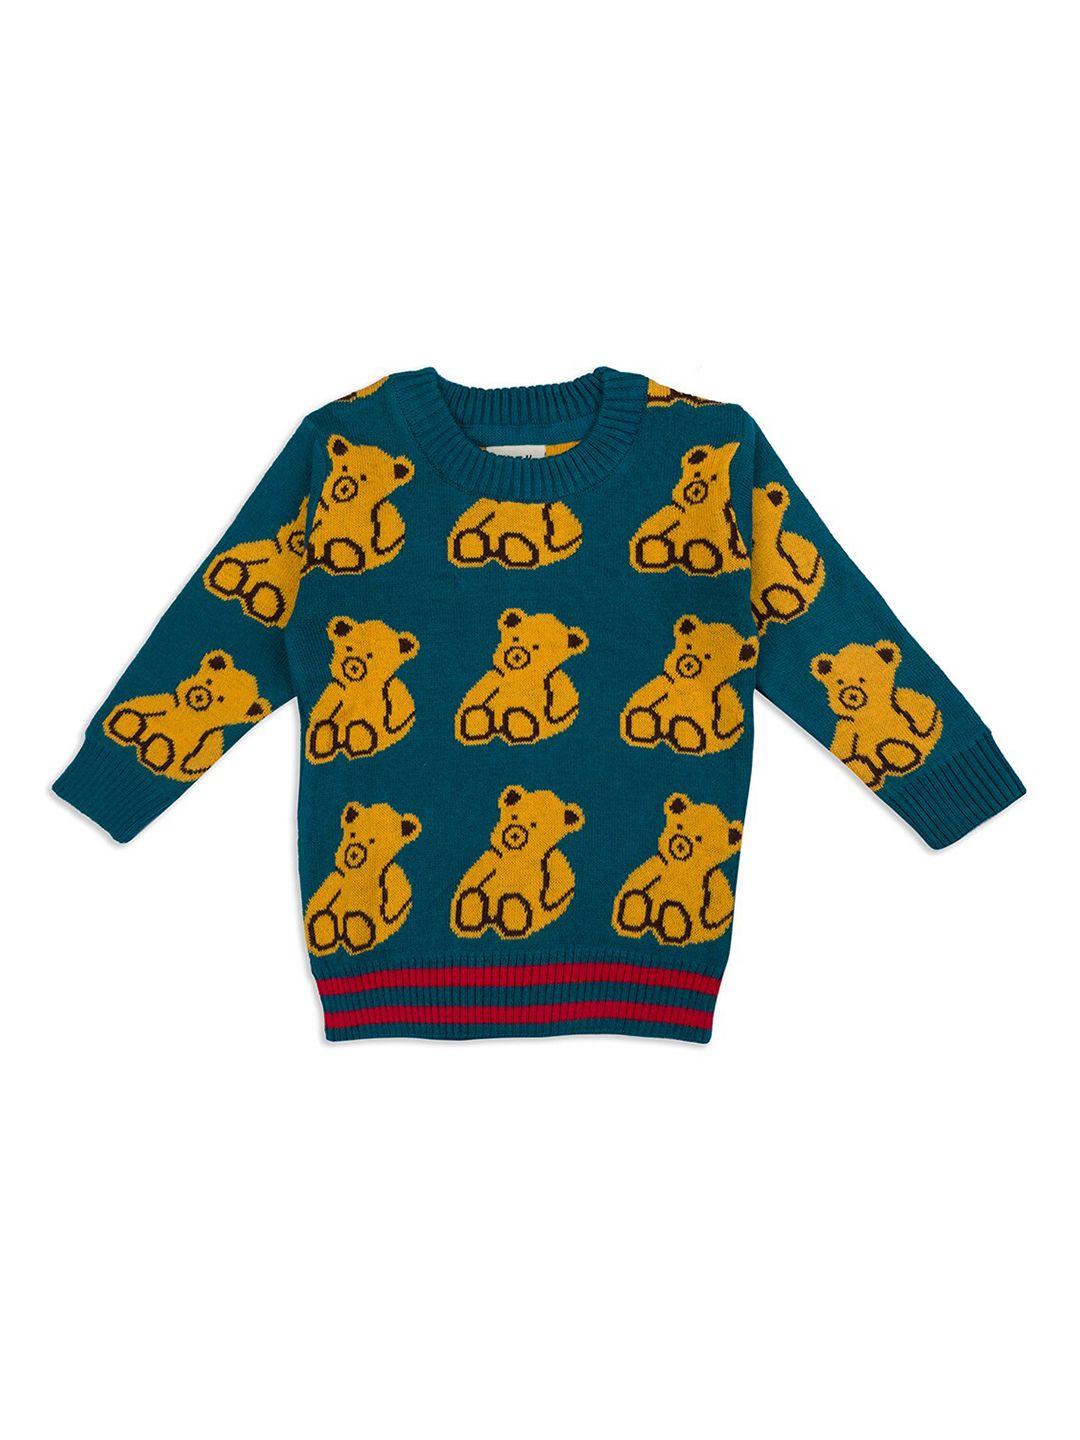 little folks unisex kids blue & yellow printed pullover